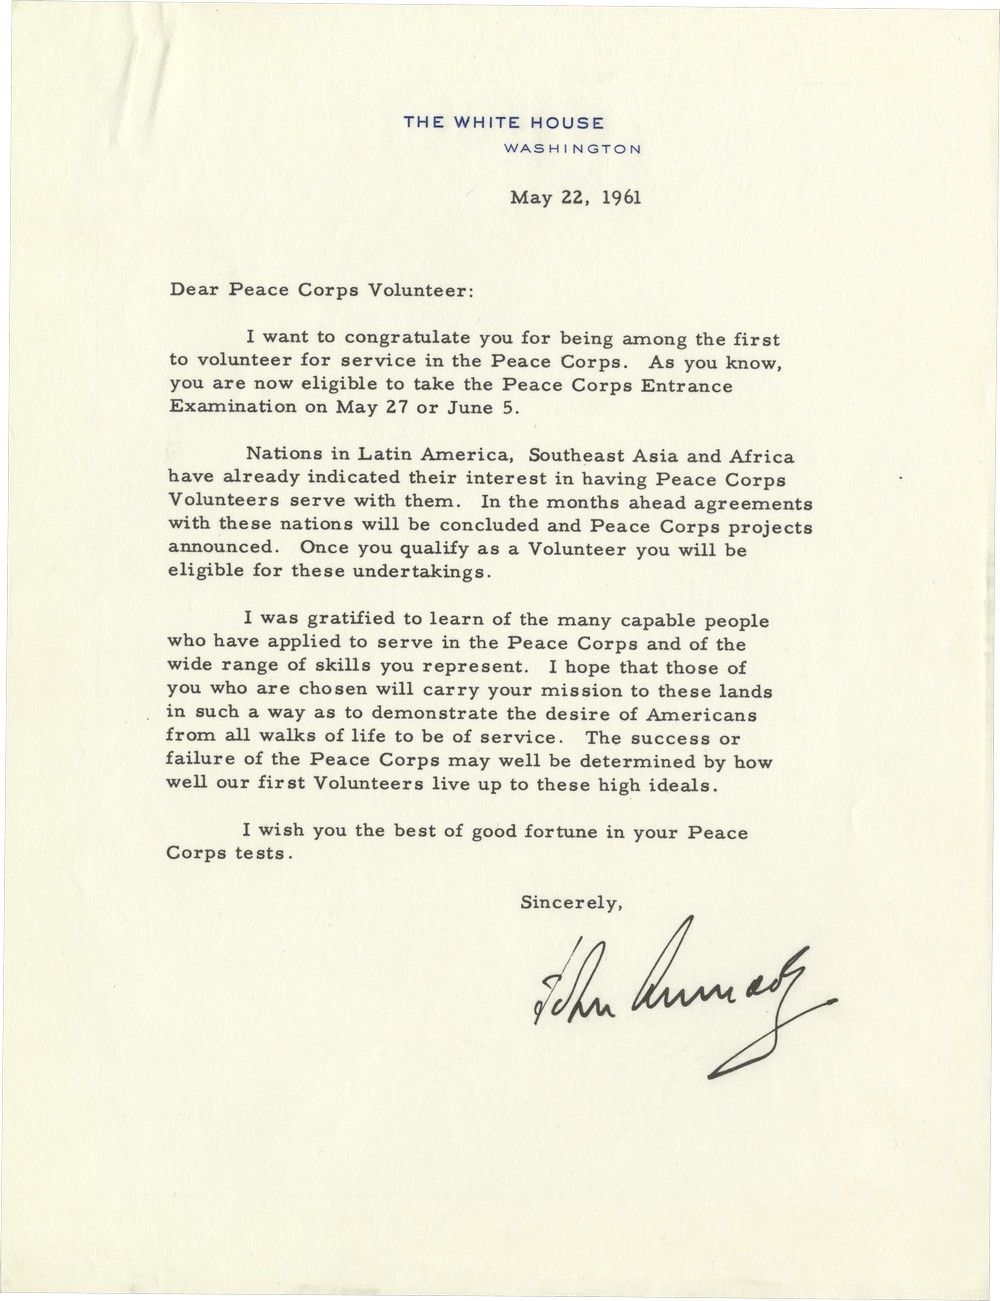 The Beginning of the Peace Corps: President Kennedy Welcomes the First Volunteers